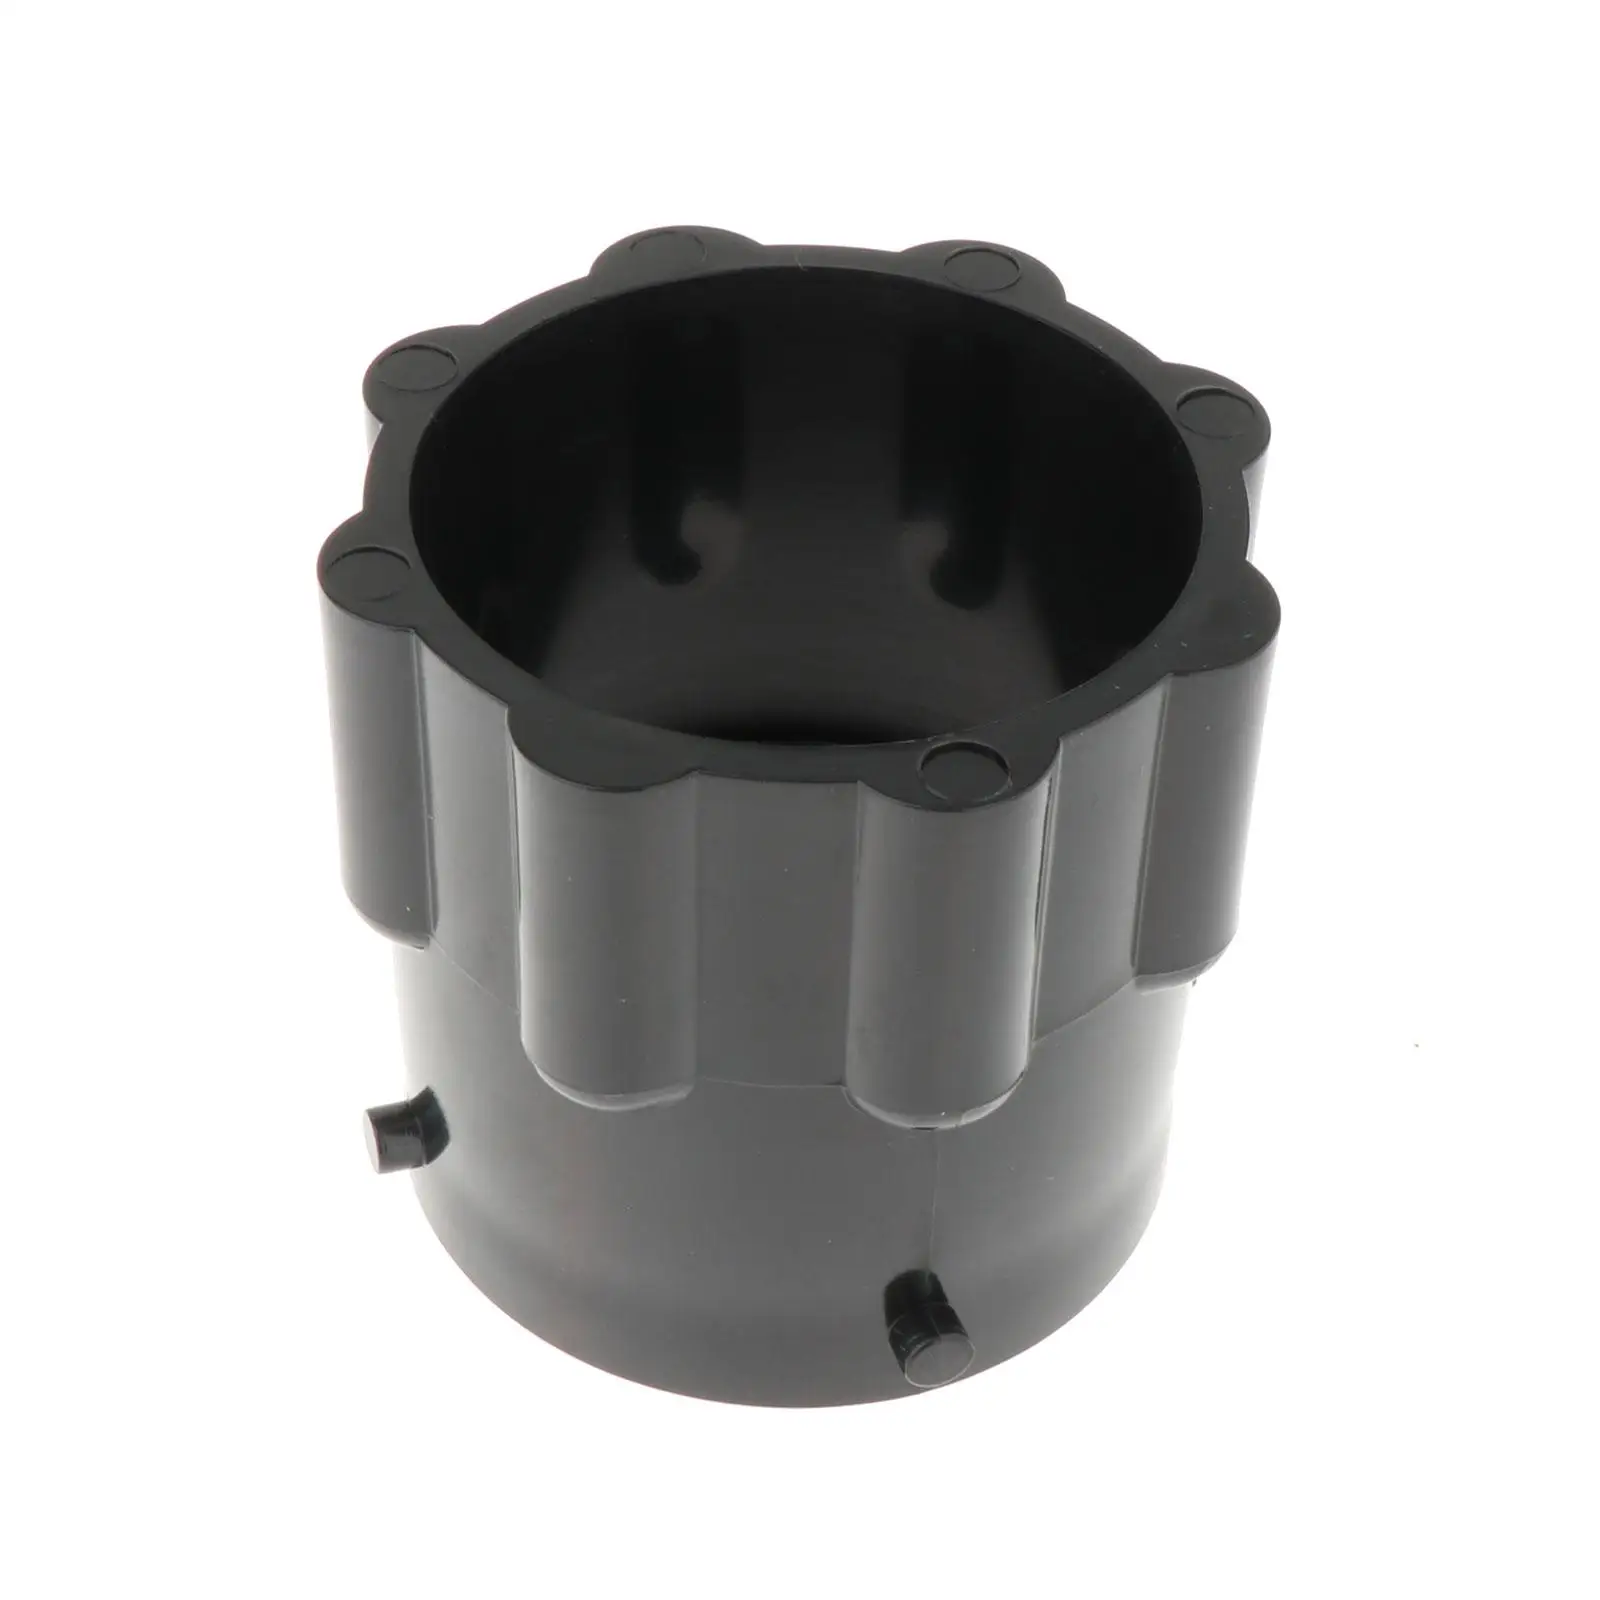 RV Sewage Adapter Durable Replace Parts Prevent Leak Termination Adapter